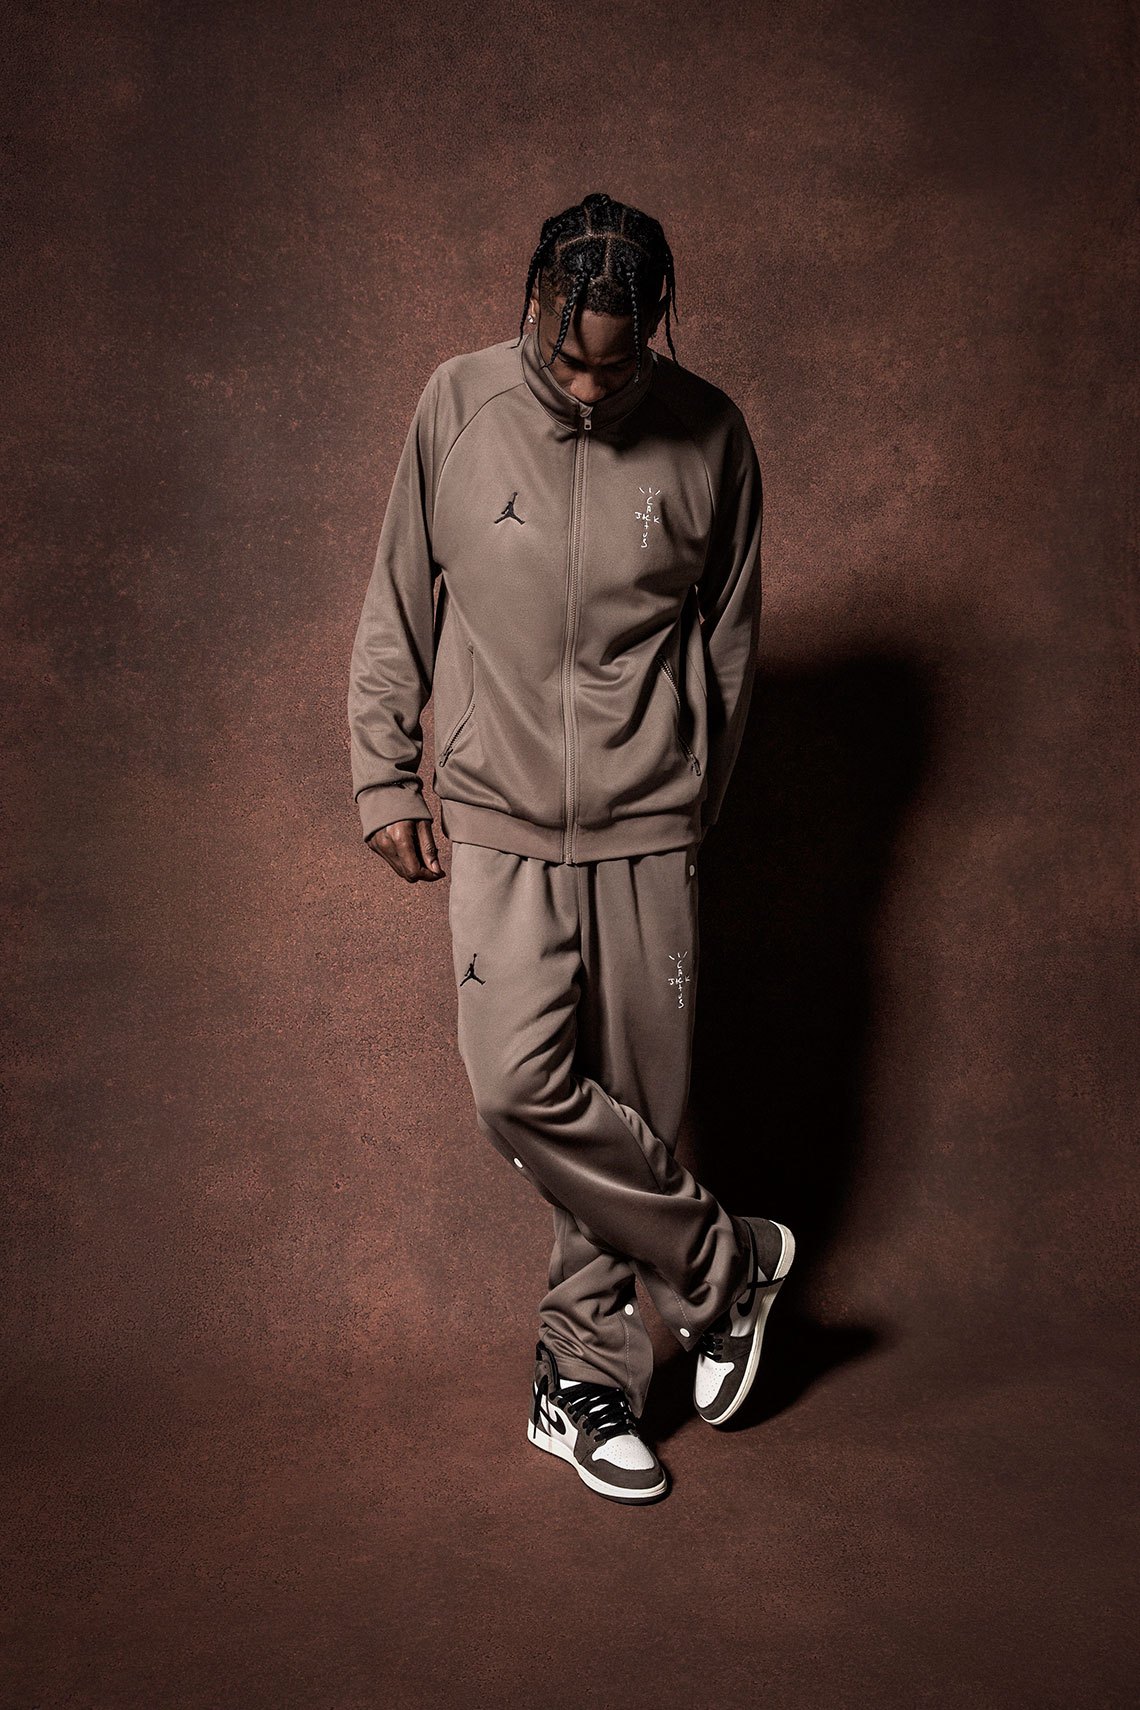 Take a Look at the Entire Travis Scott x Air Jordan 1 Collection